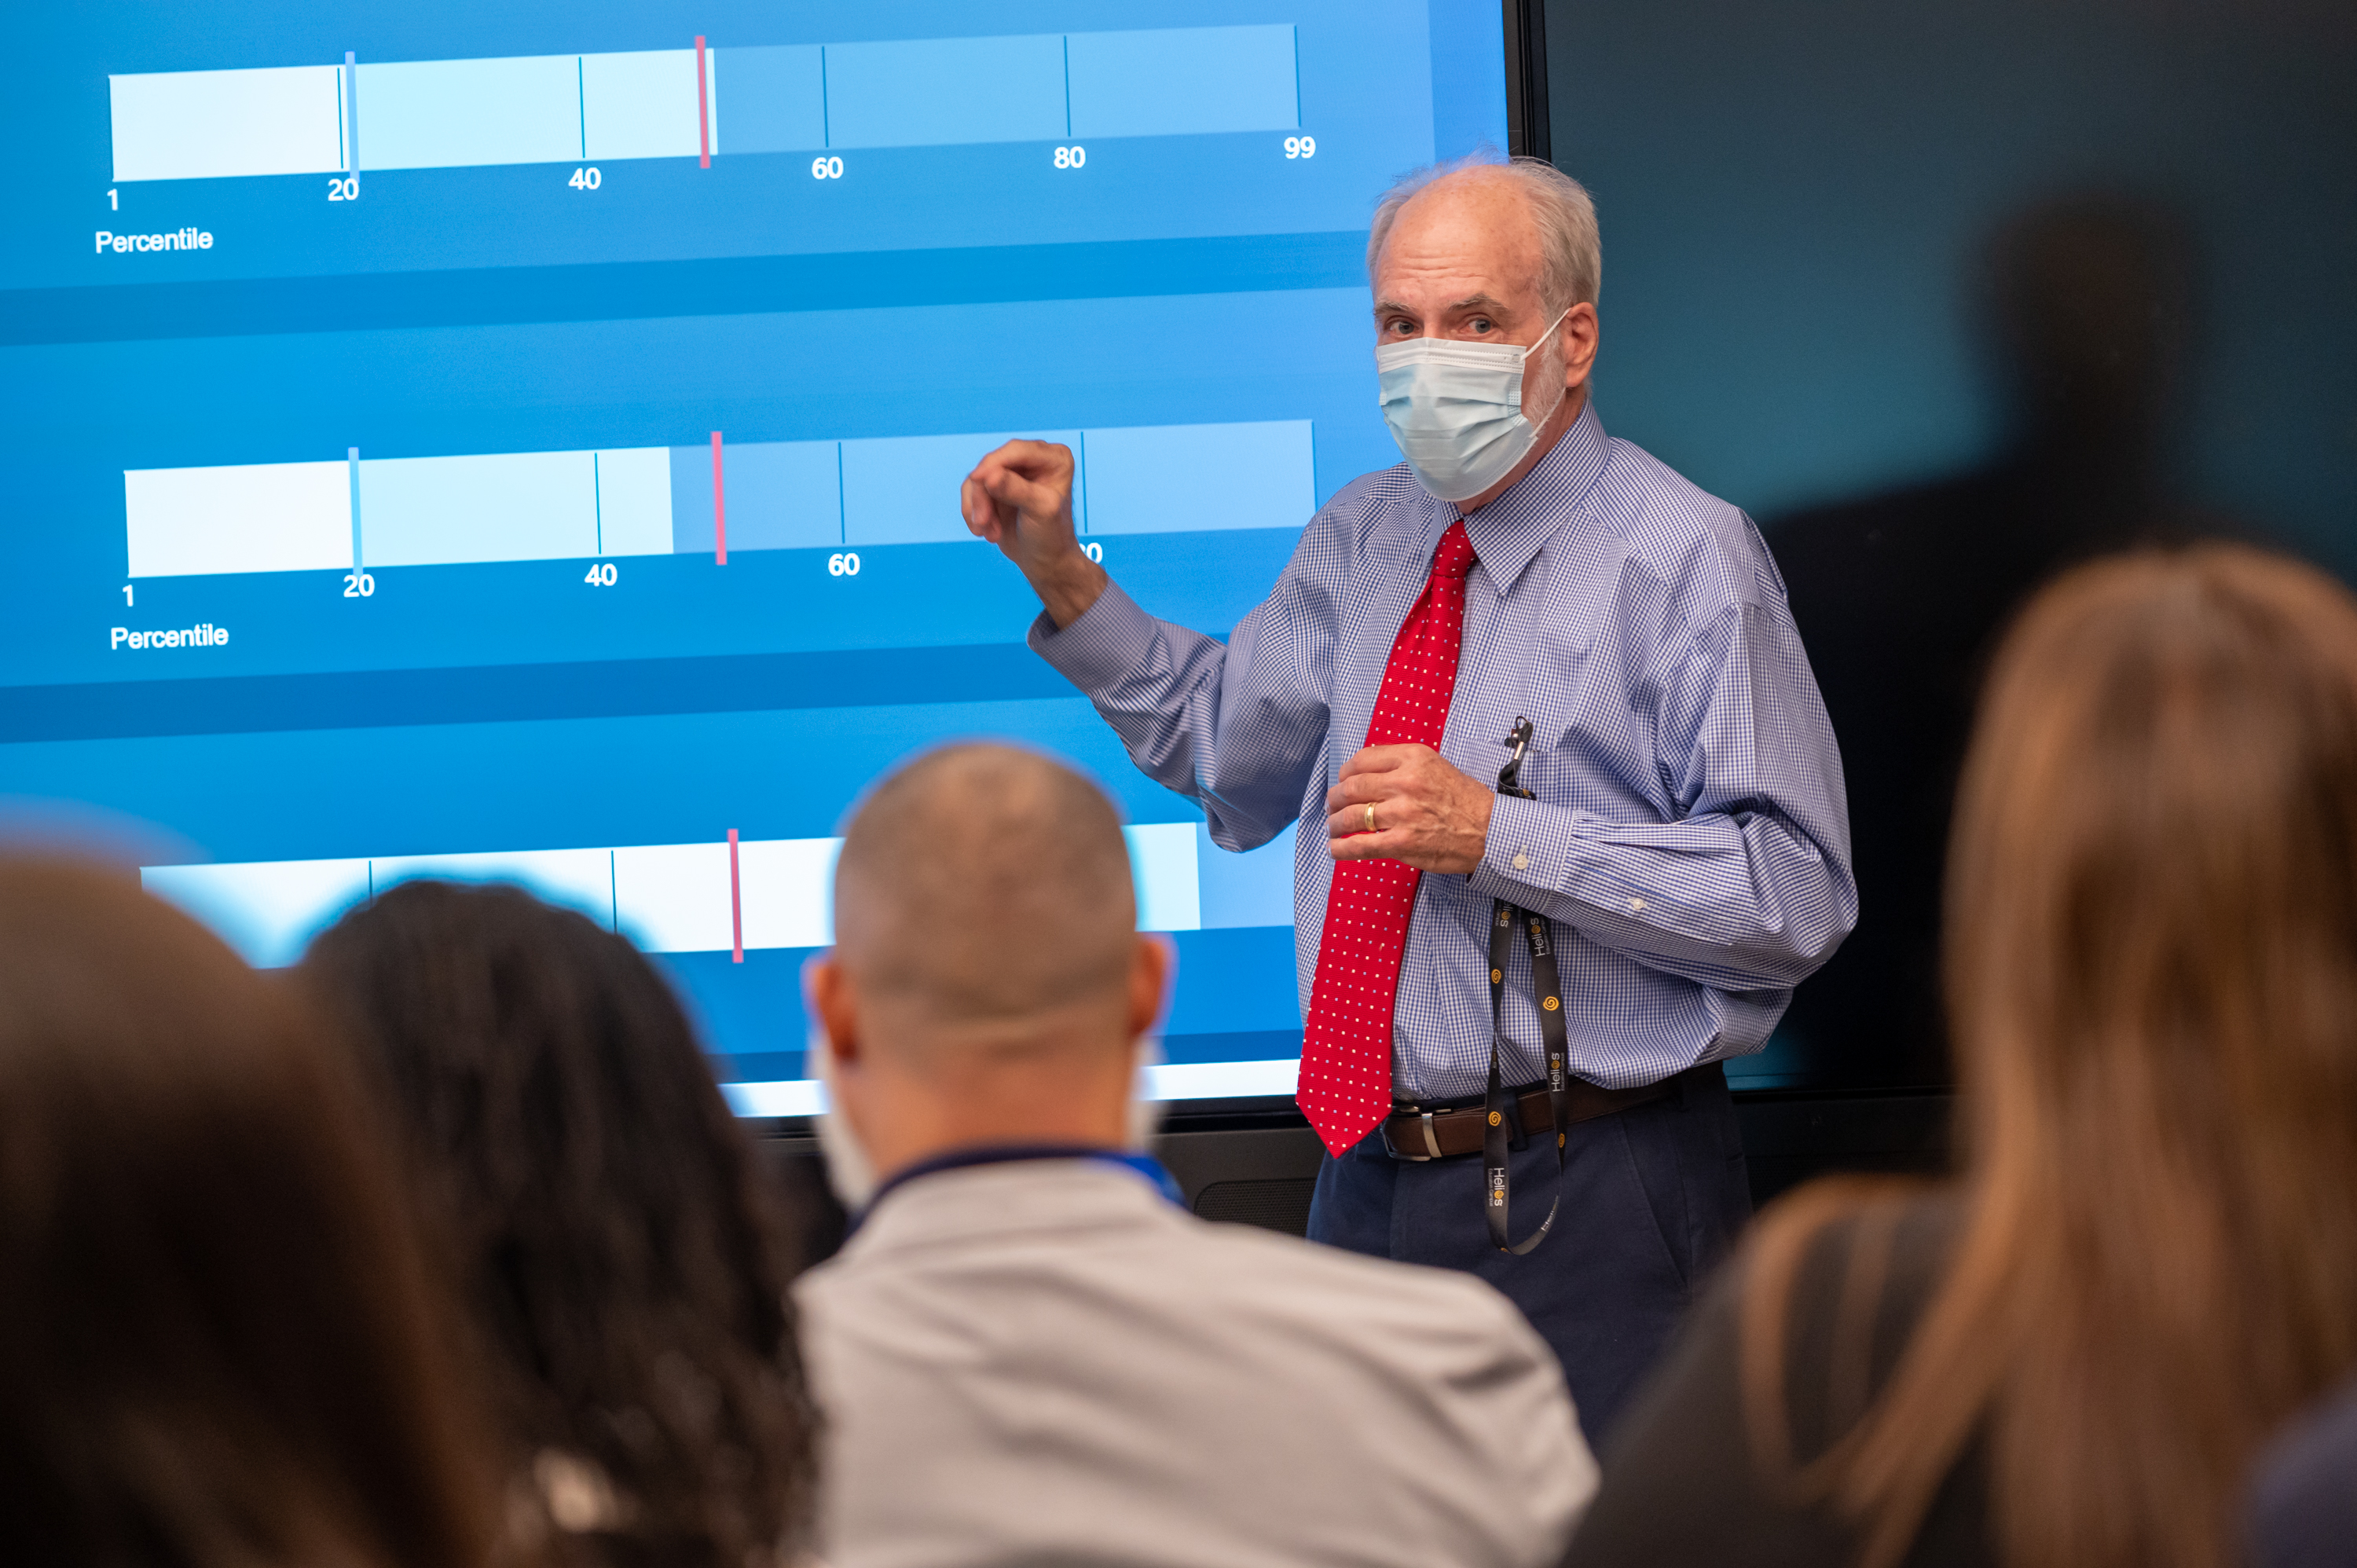 Joseph O'Reilly wearing face mask stands in front of large blue screen presenting data to a group of adults.